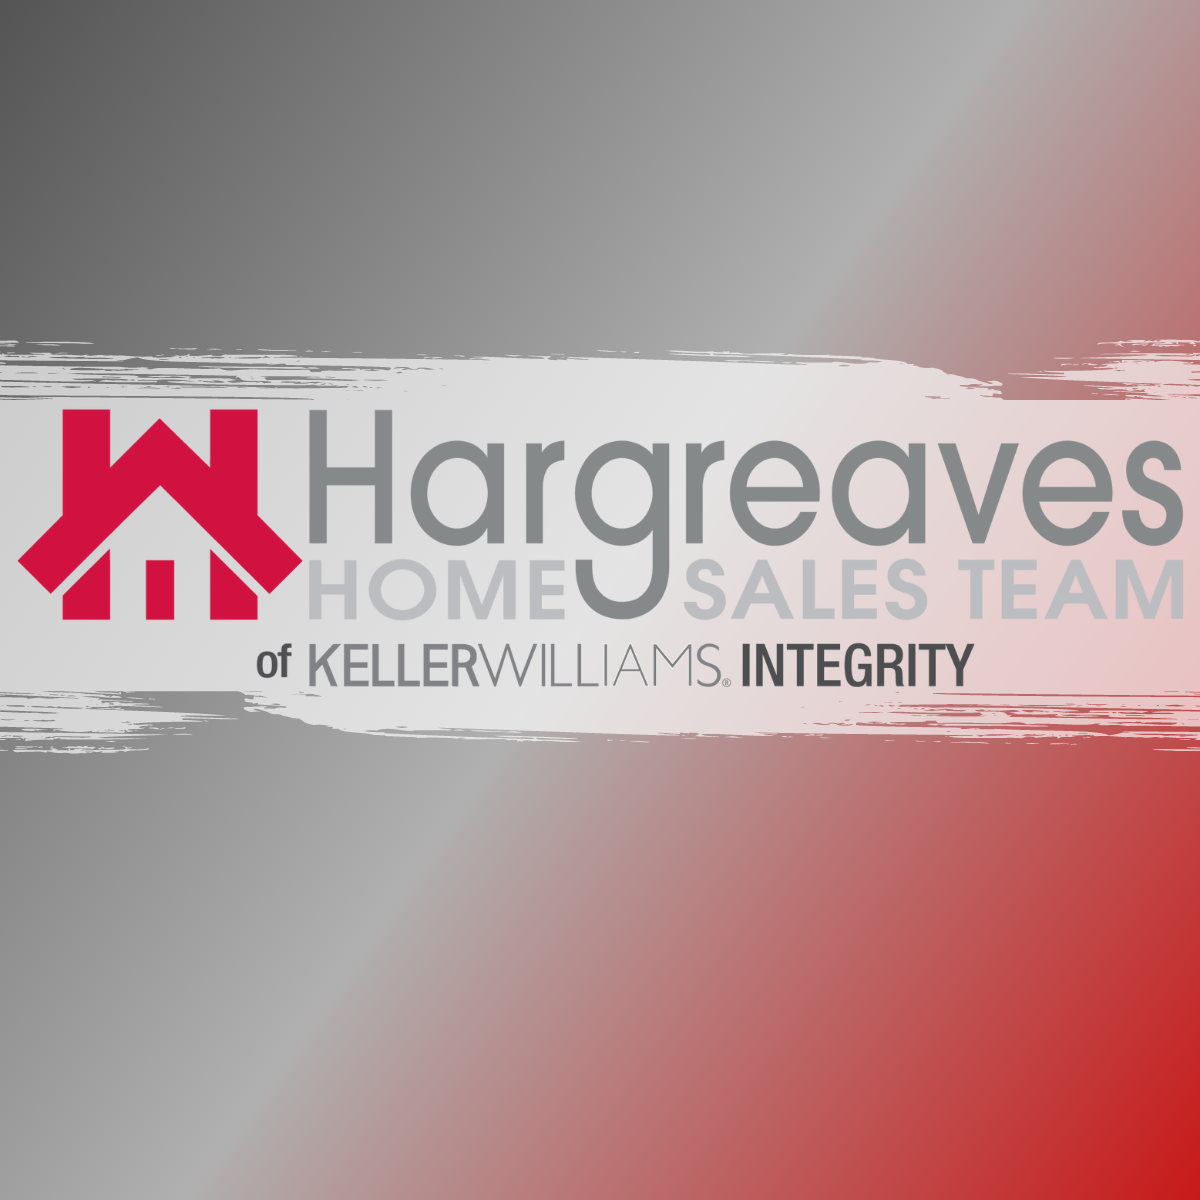 The Hargreaves Home Sales Team of Keller Williams Integrity